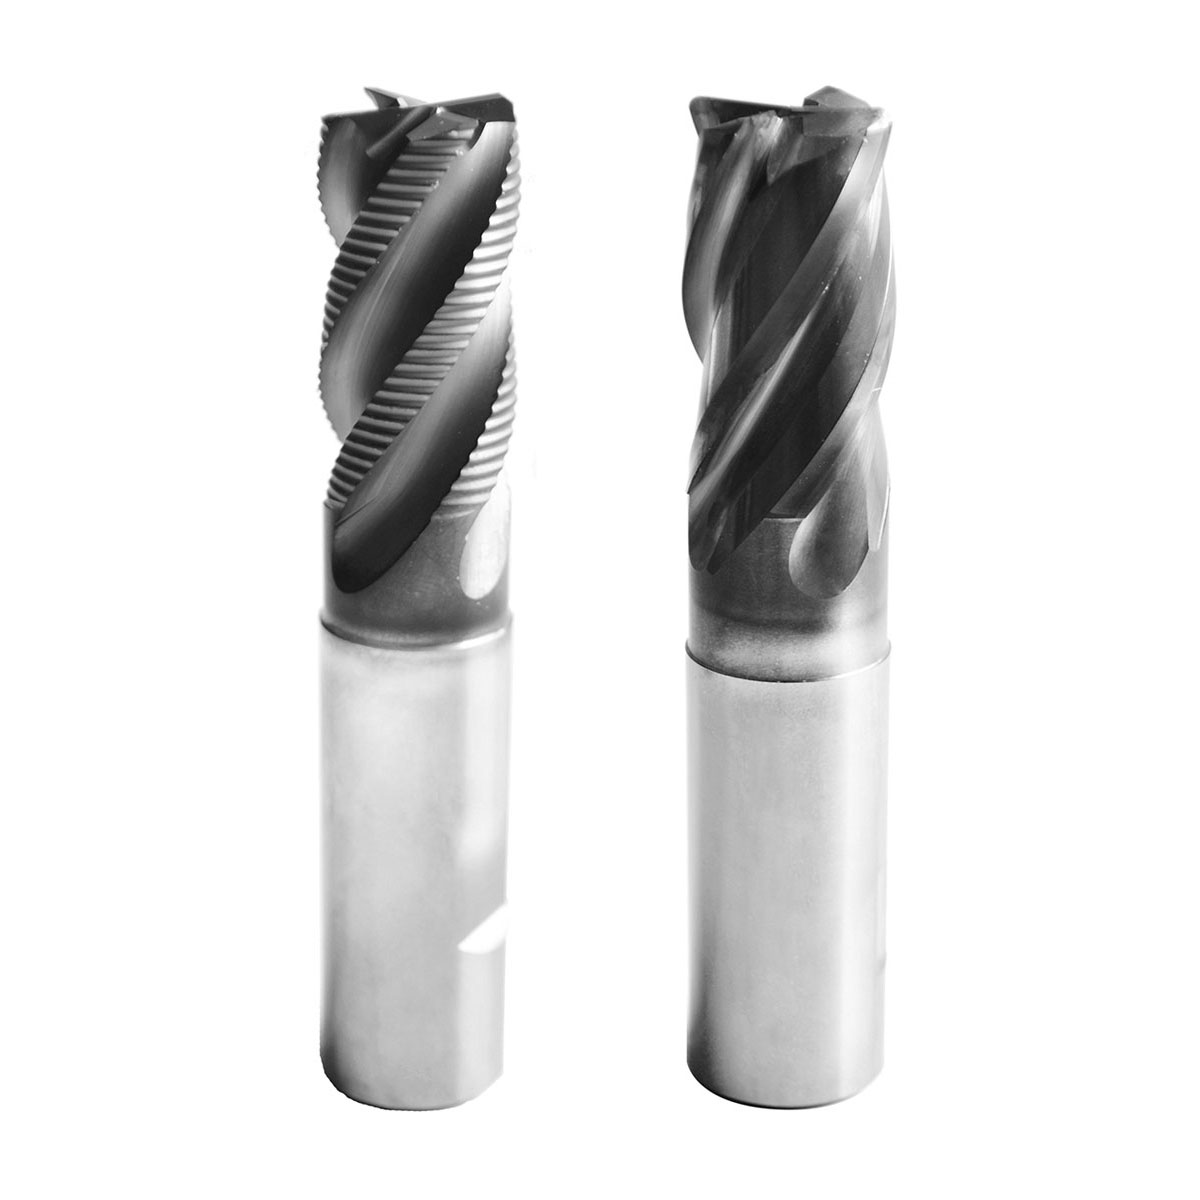 End Mills for Hard Hard-To-Work Materials - HTT High Tech Tools